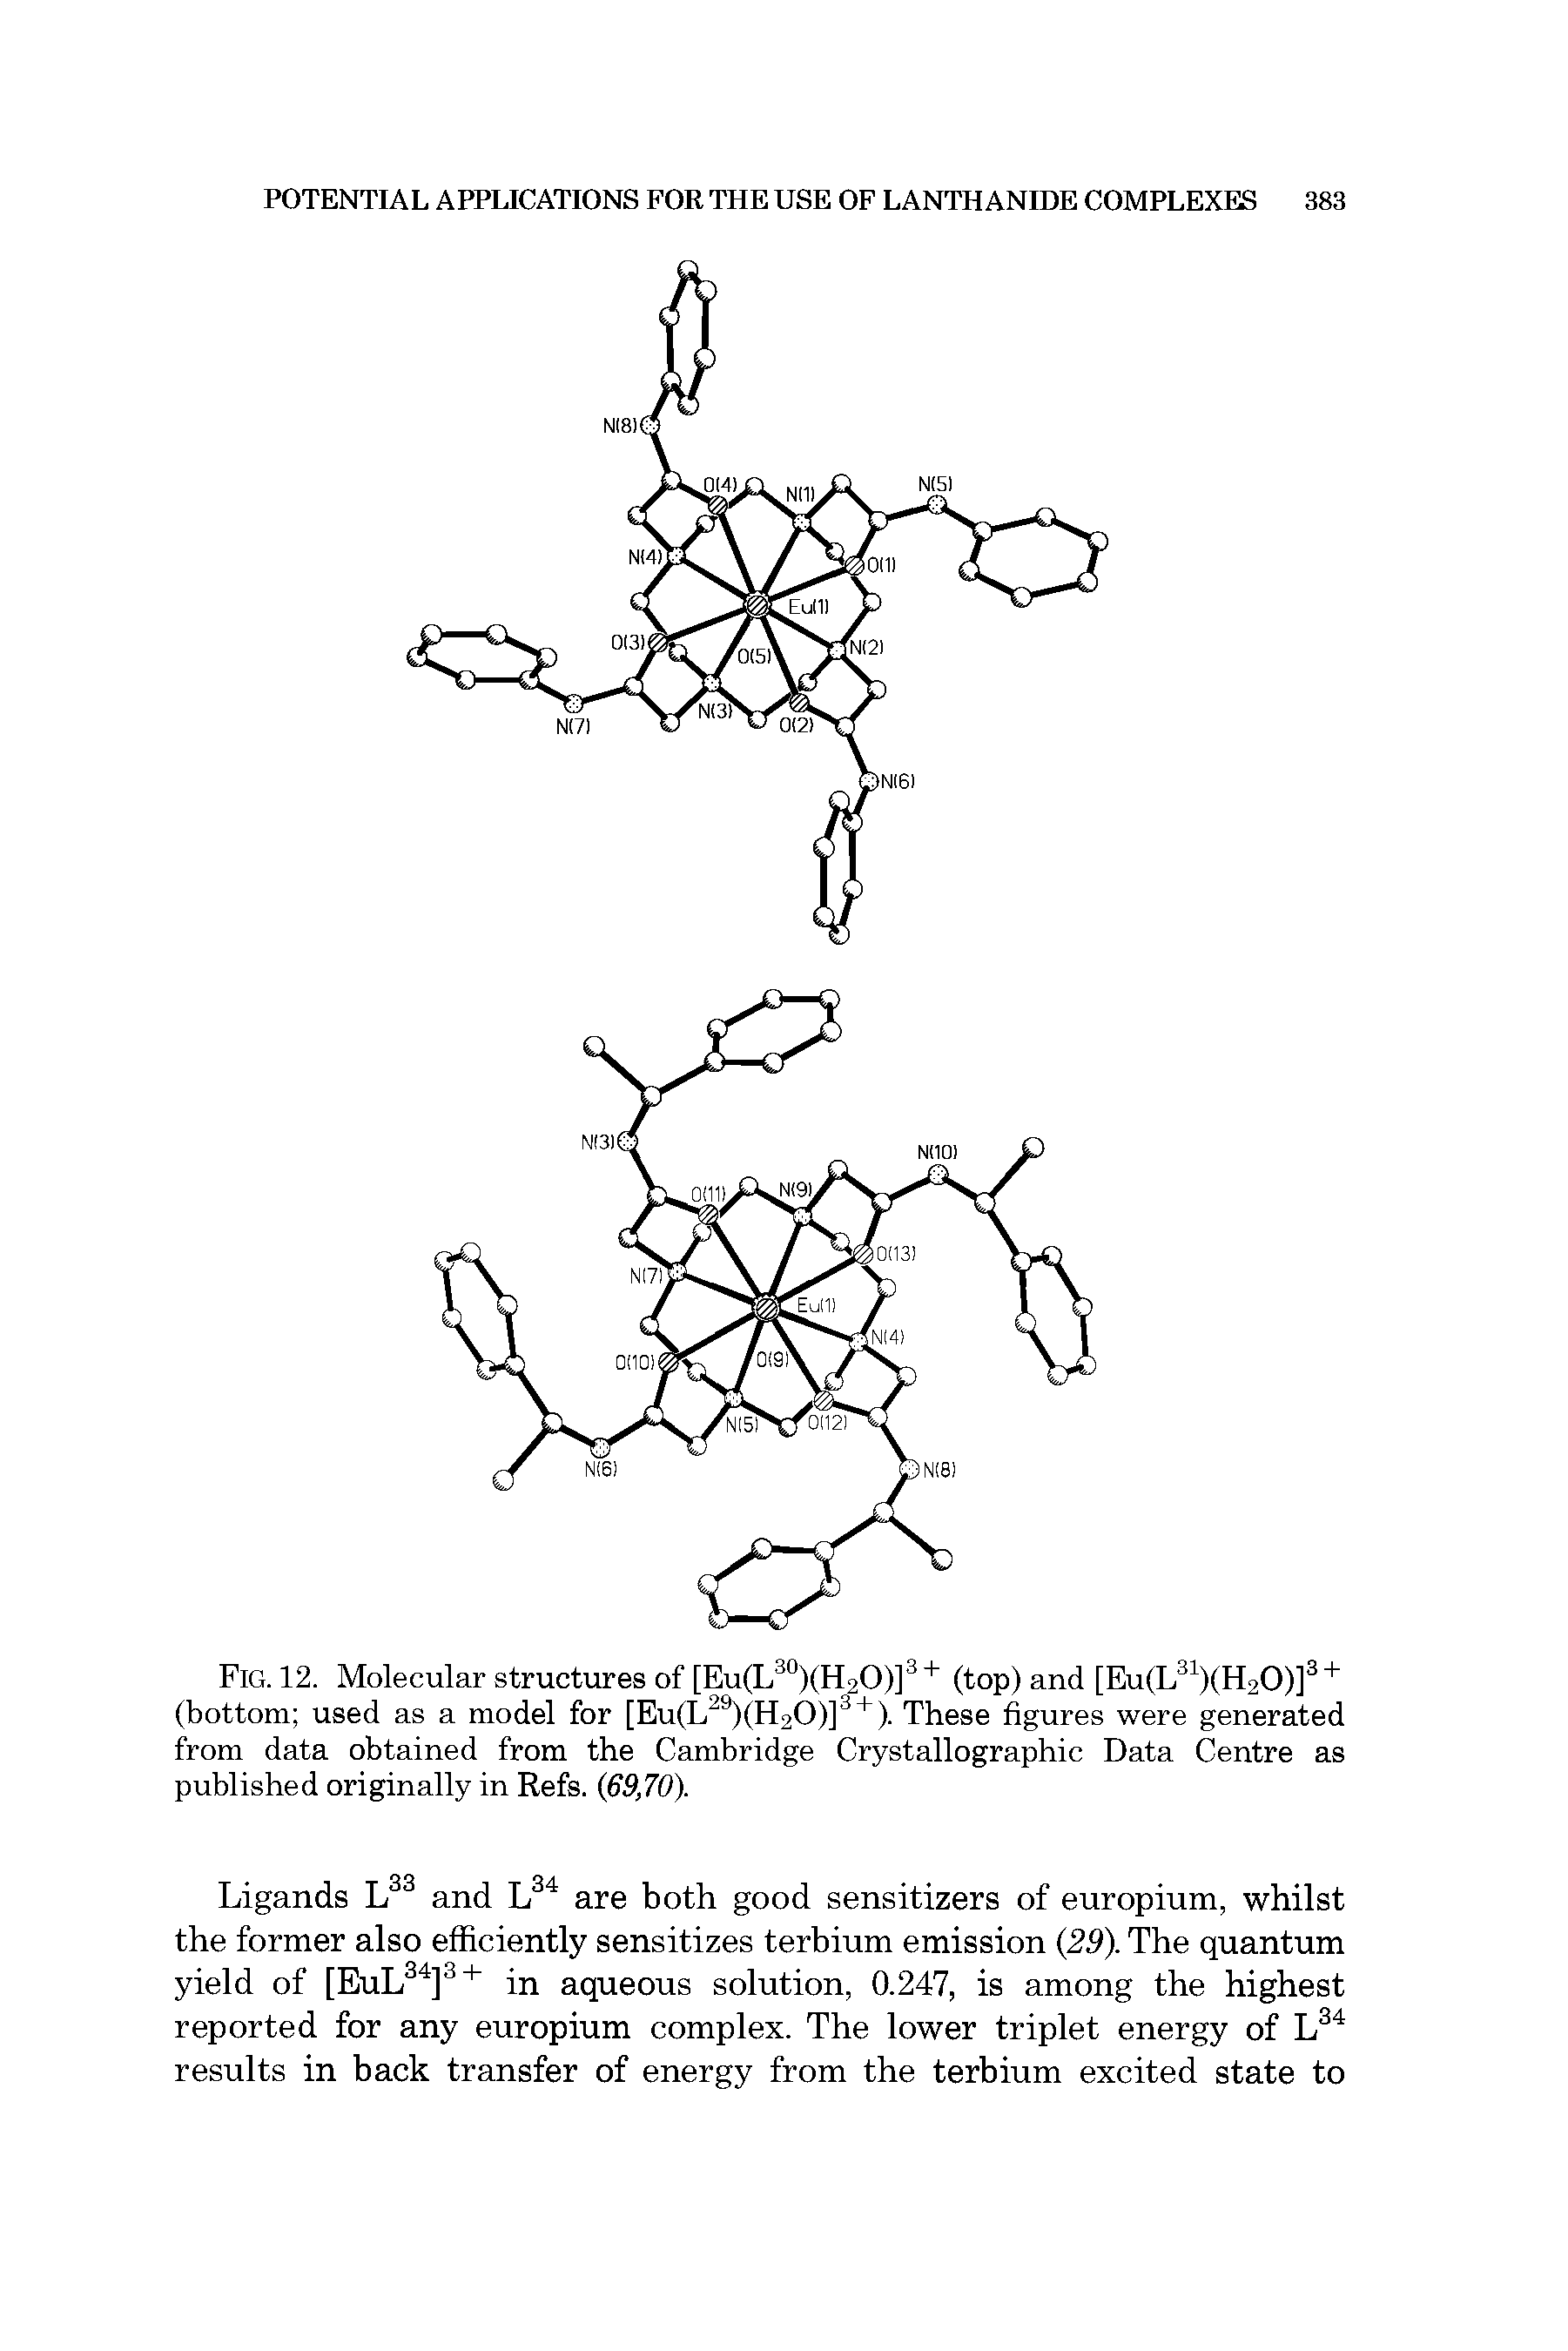 Fig. 12. Molecular structures of [Eu(L30)(H2O)]3+ (top) and [Eu(L31)(H20)]3 + (bottom used as a model for [Eu(L29)(H20)]3 + ). These figures were generated from data obtained from the Cambridge Crystallographic Data Centre as published originally in Refs. (69,70).